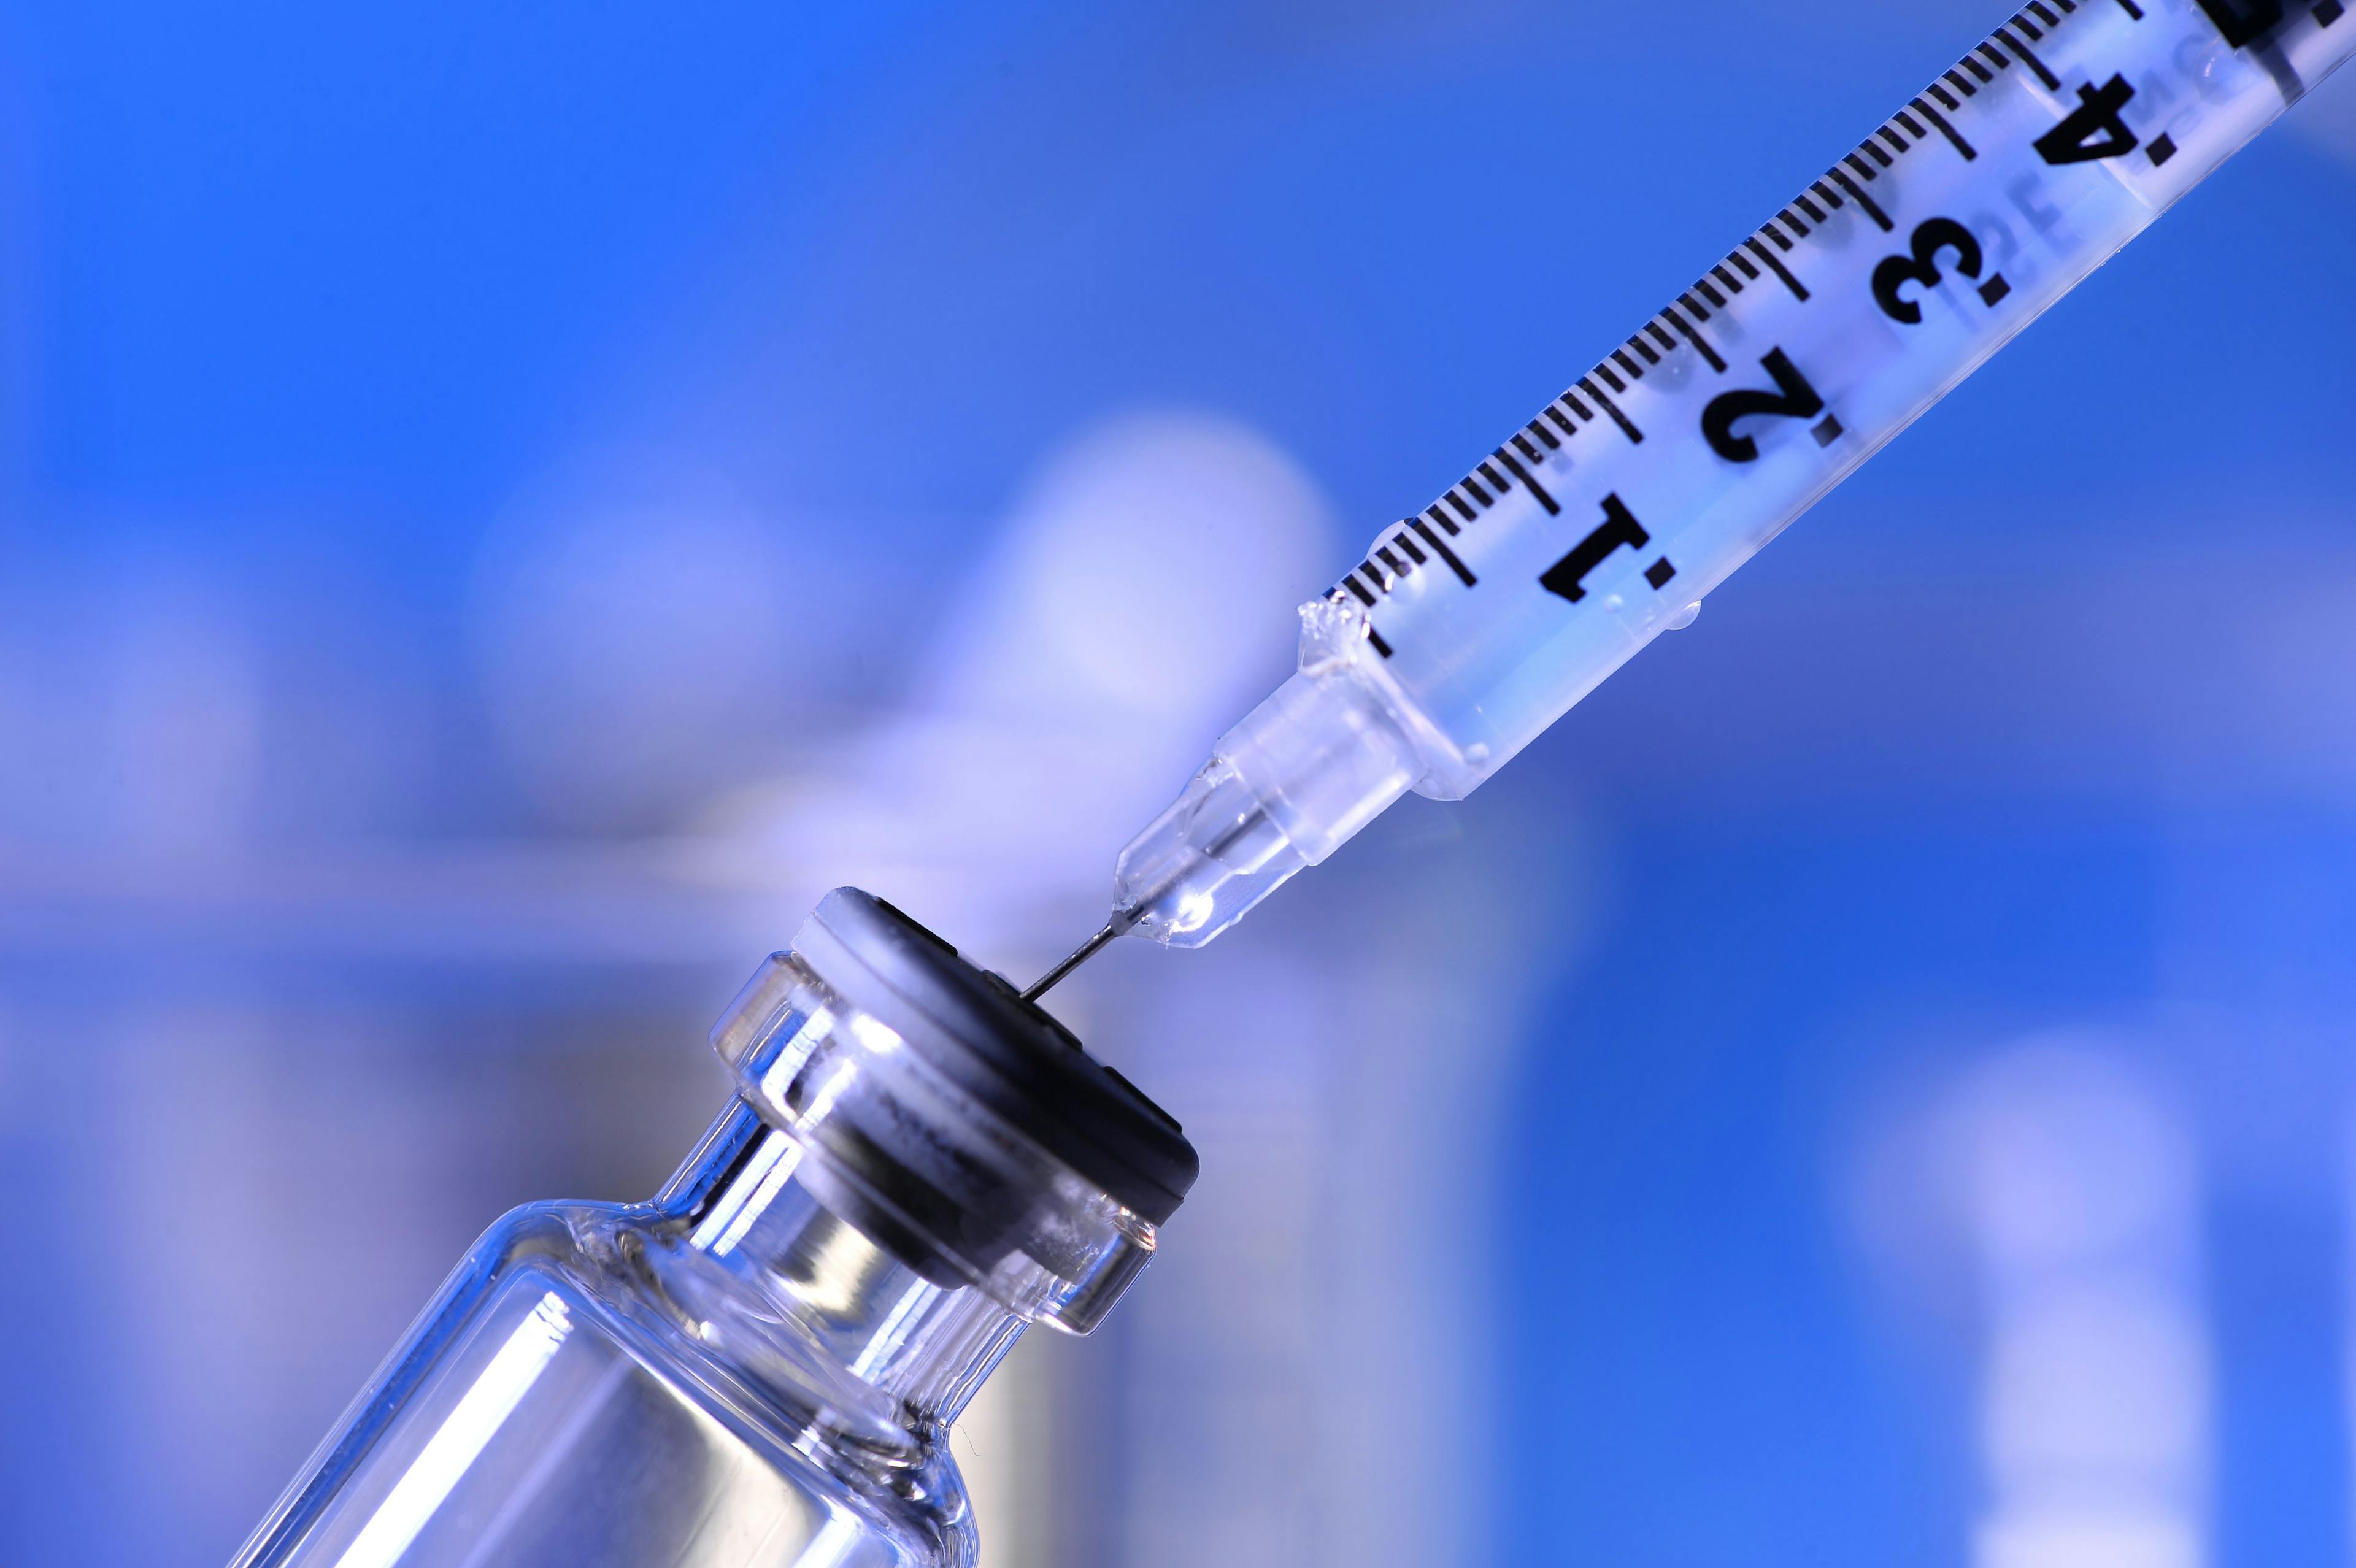 Immunizations for Older Adults Are Vital